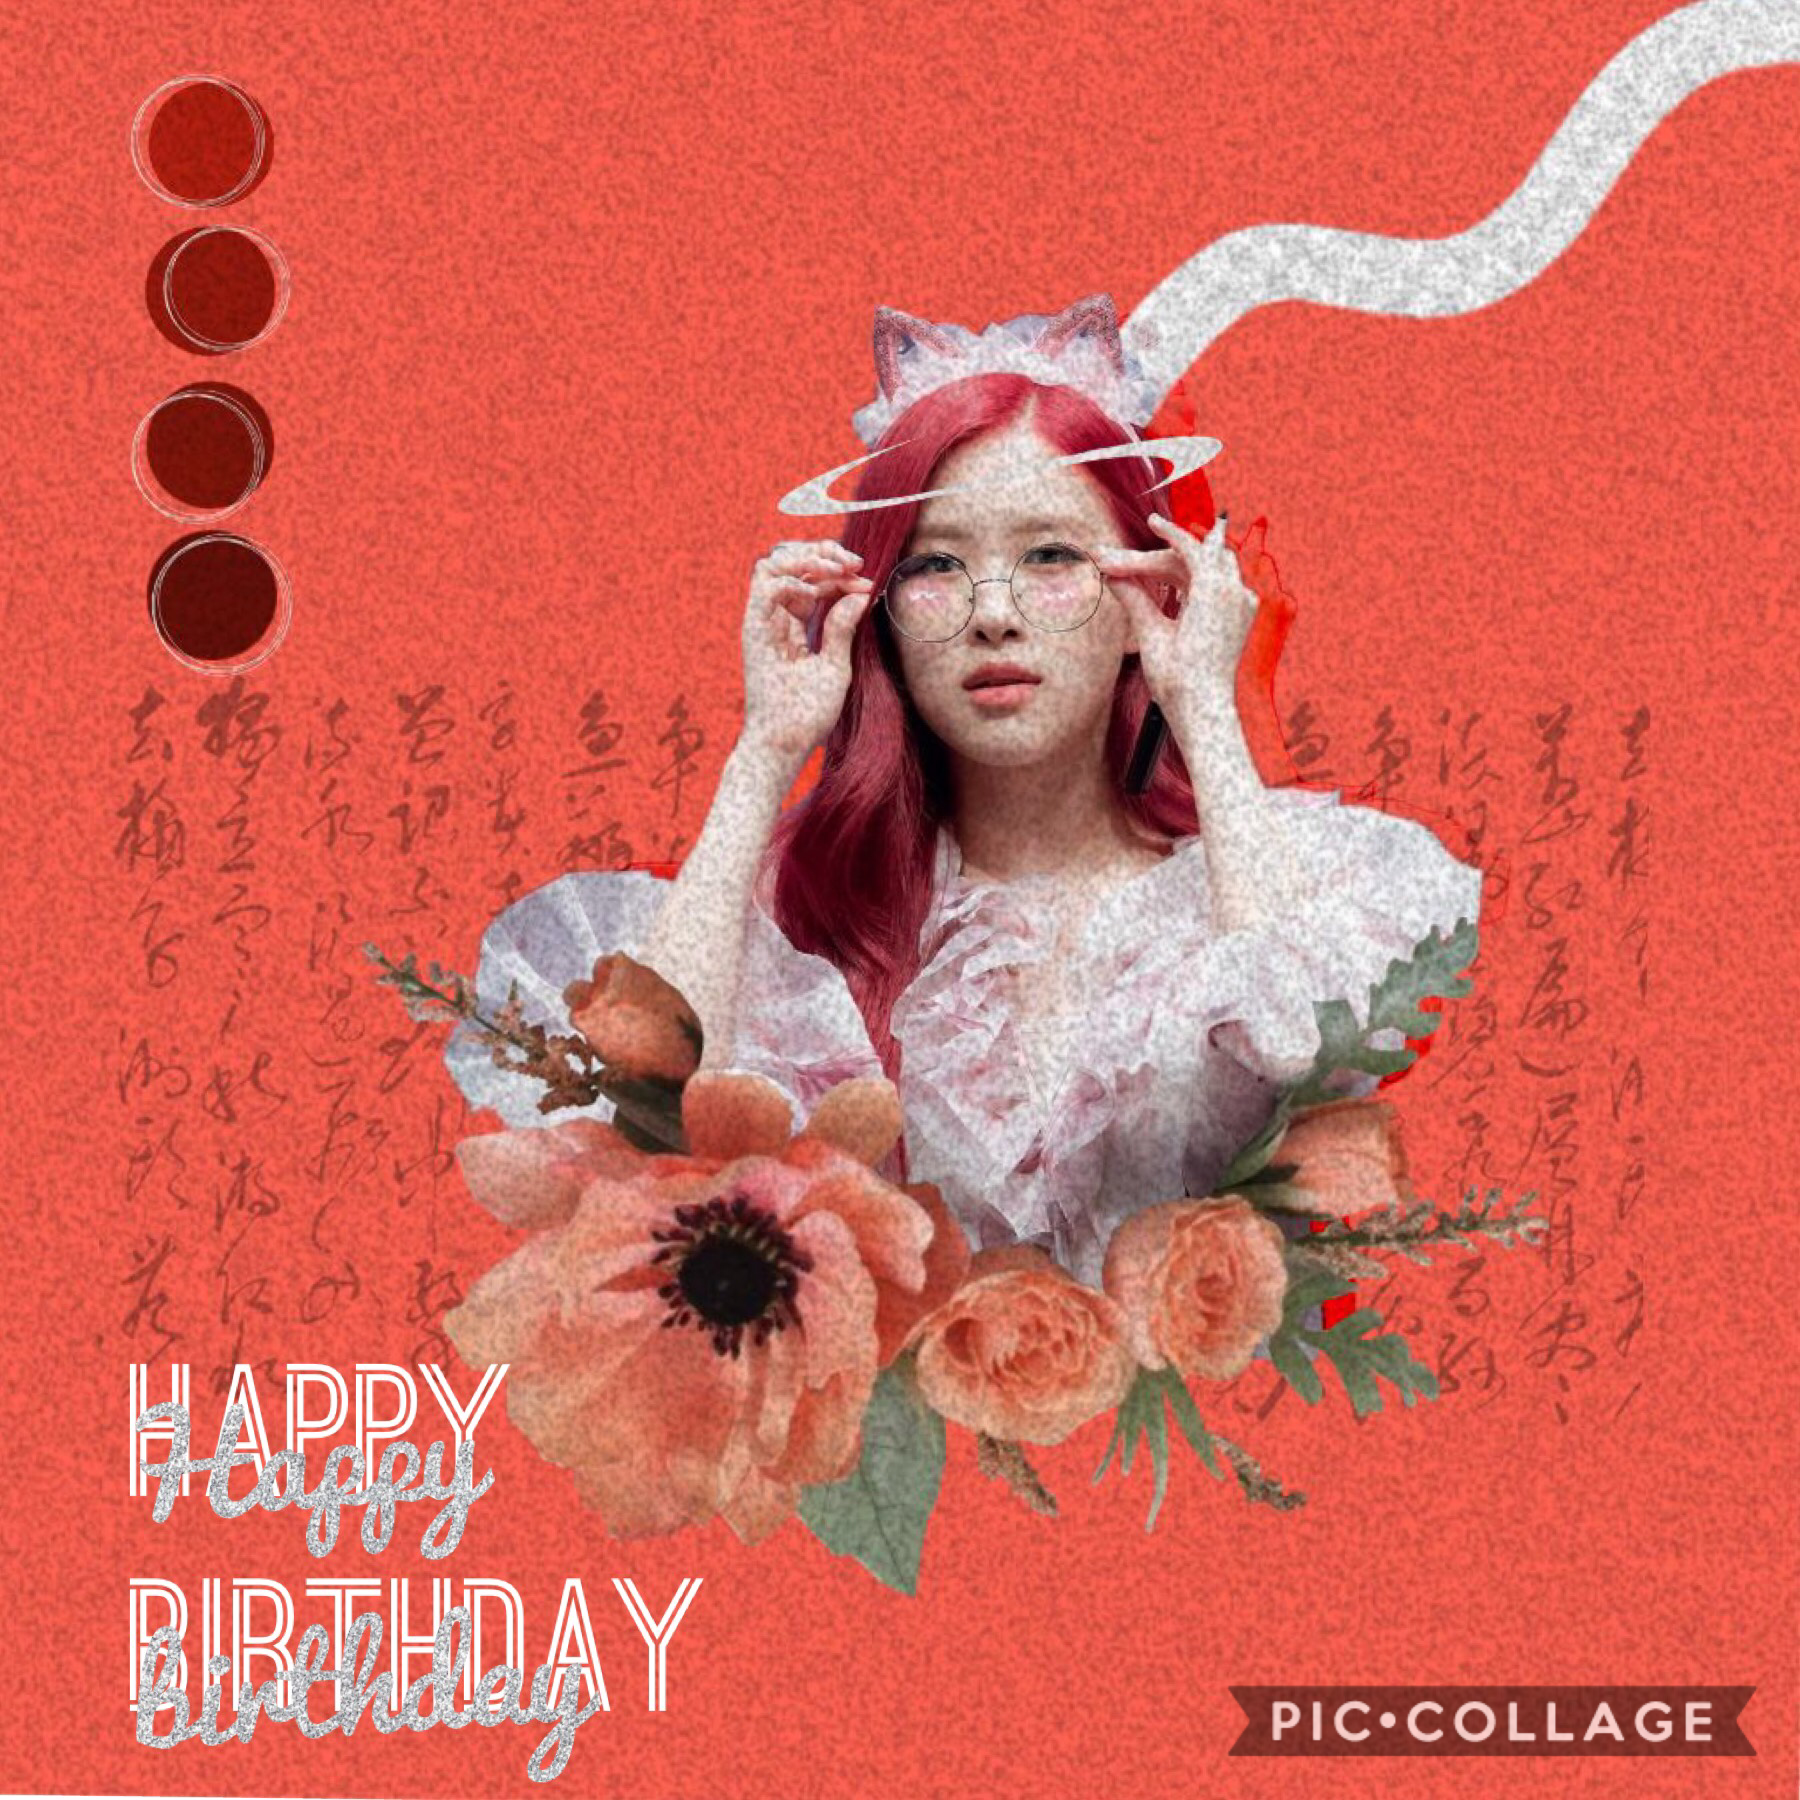 It’s okay not the best but 🥺🥺🥺🥺❤️❤️❤️❤️happy B-day ❣️